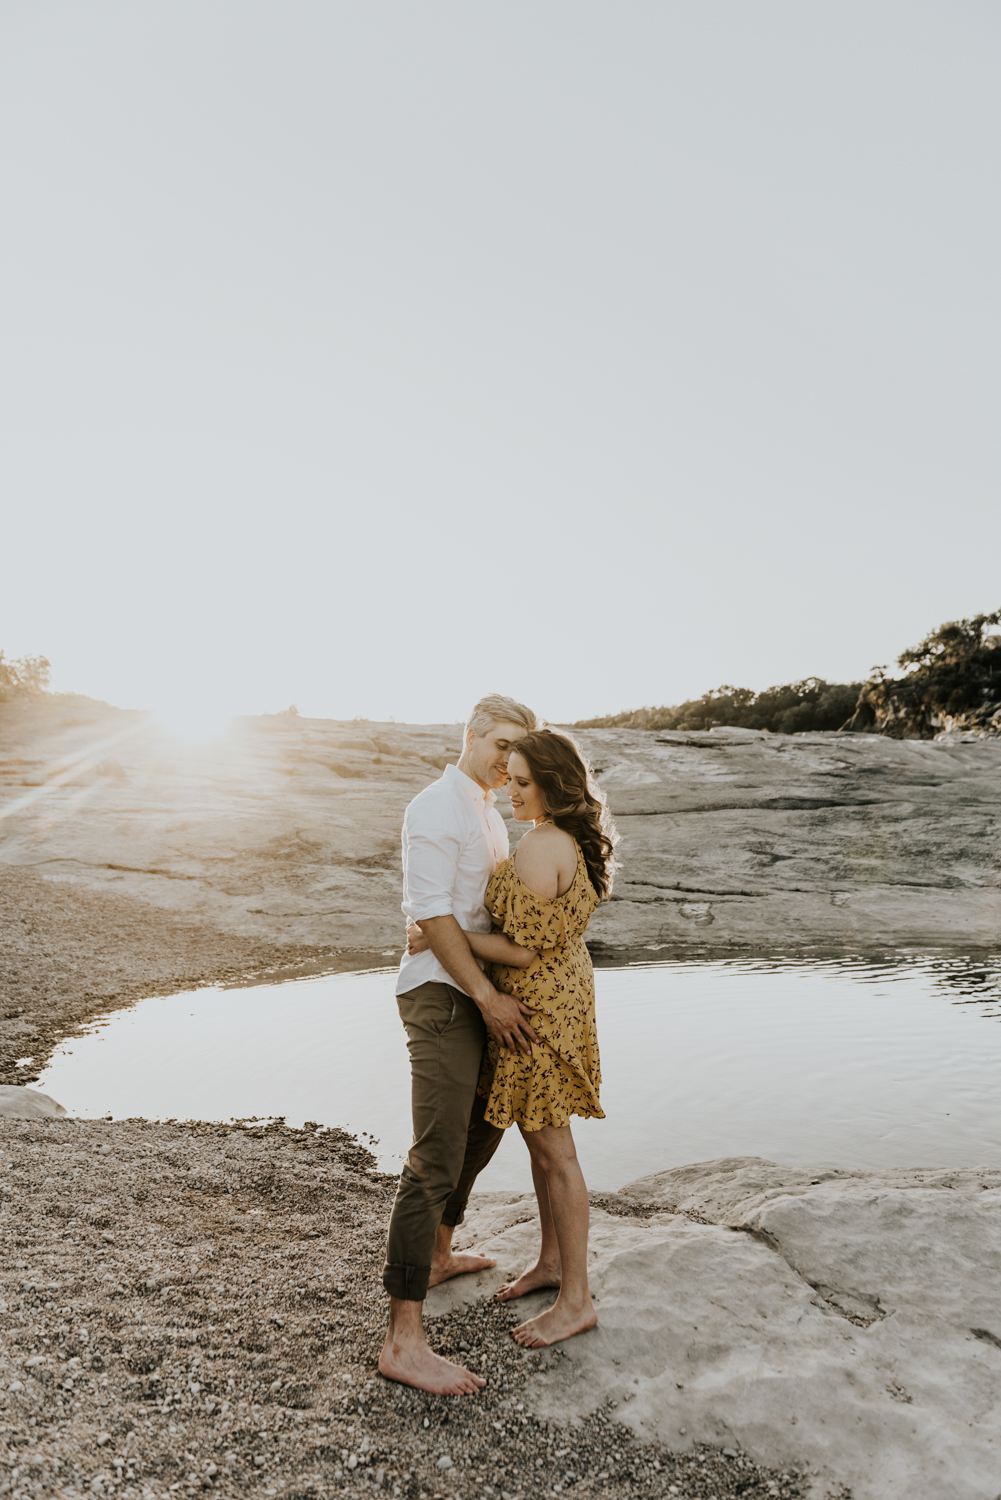 Texas Hill Country Adventurous Engagement Session at Collective Retreats and Pedernales Falls, Texas